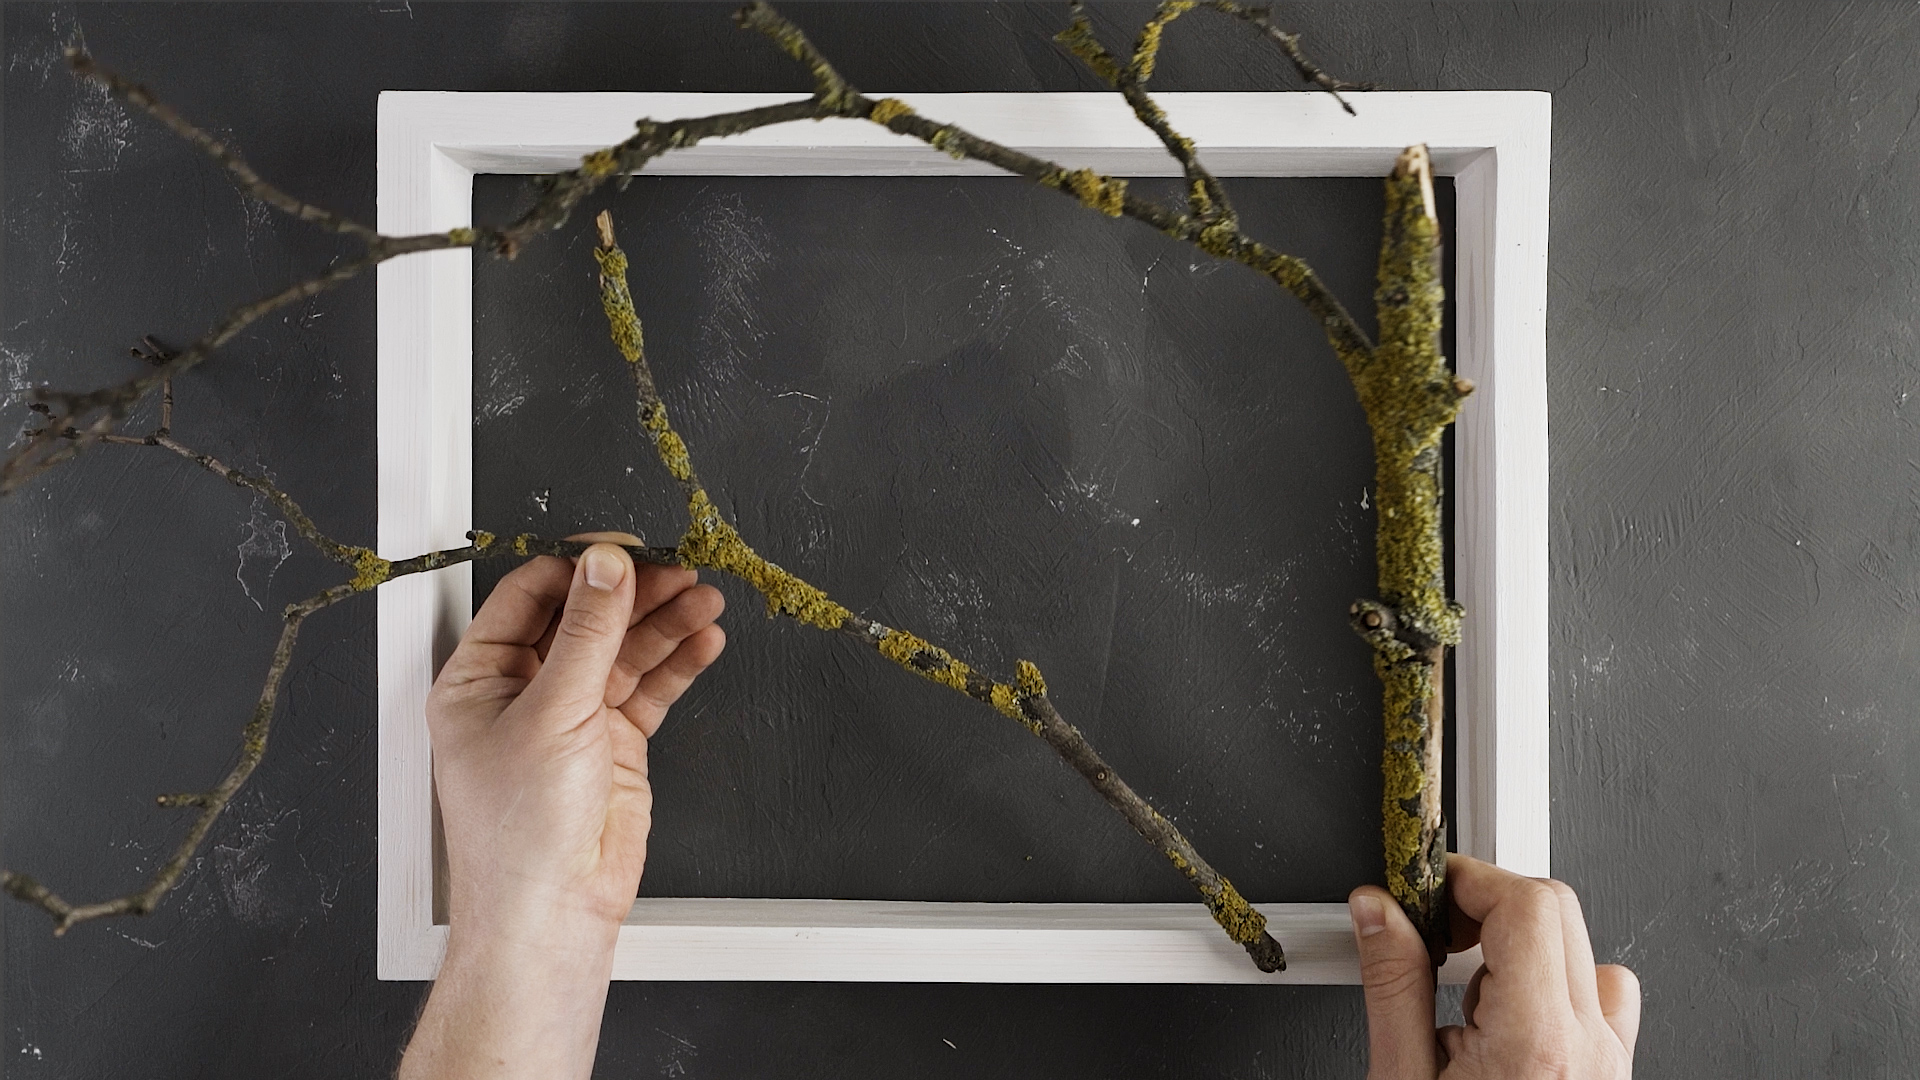 Find proper branches (better with moss on them for a more natural look) to fit your frame.